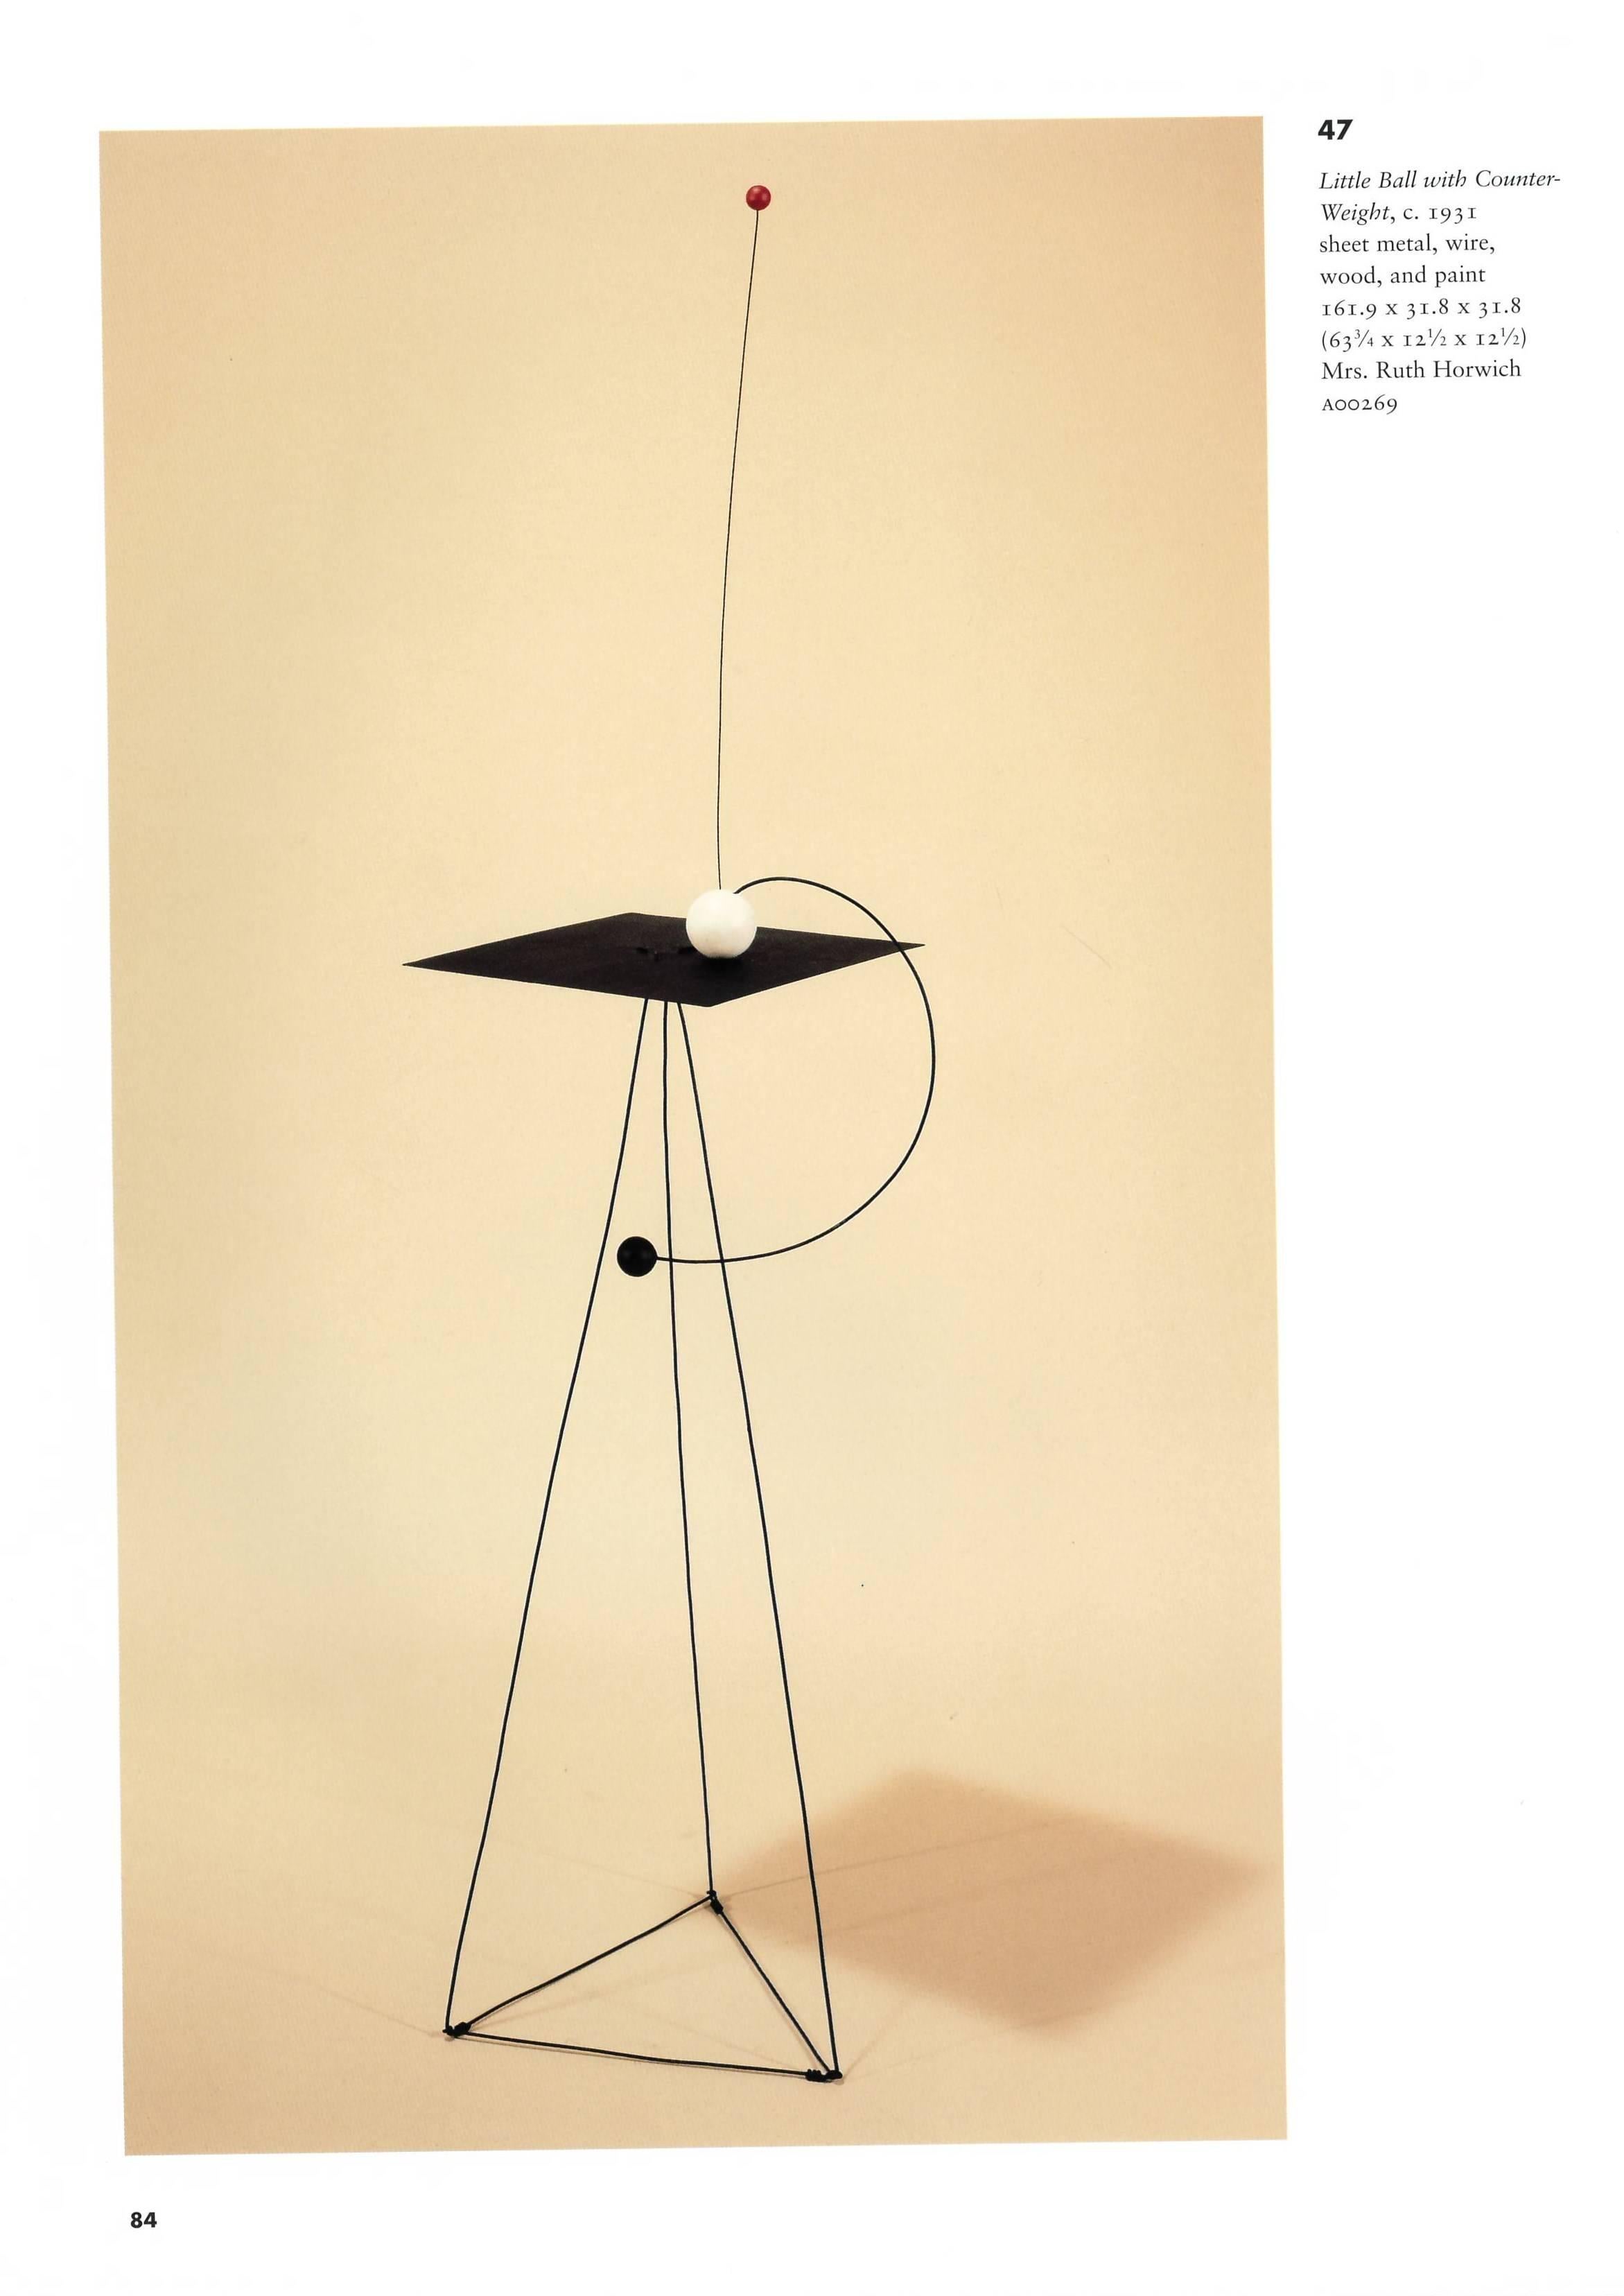 Alexander Calder was on of the most prolific artists of the 20th century and is now one of the most sought after. He worked with many different types of media from figurative wire sculpture, through abstract mobiles and stabiles, carvings,